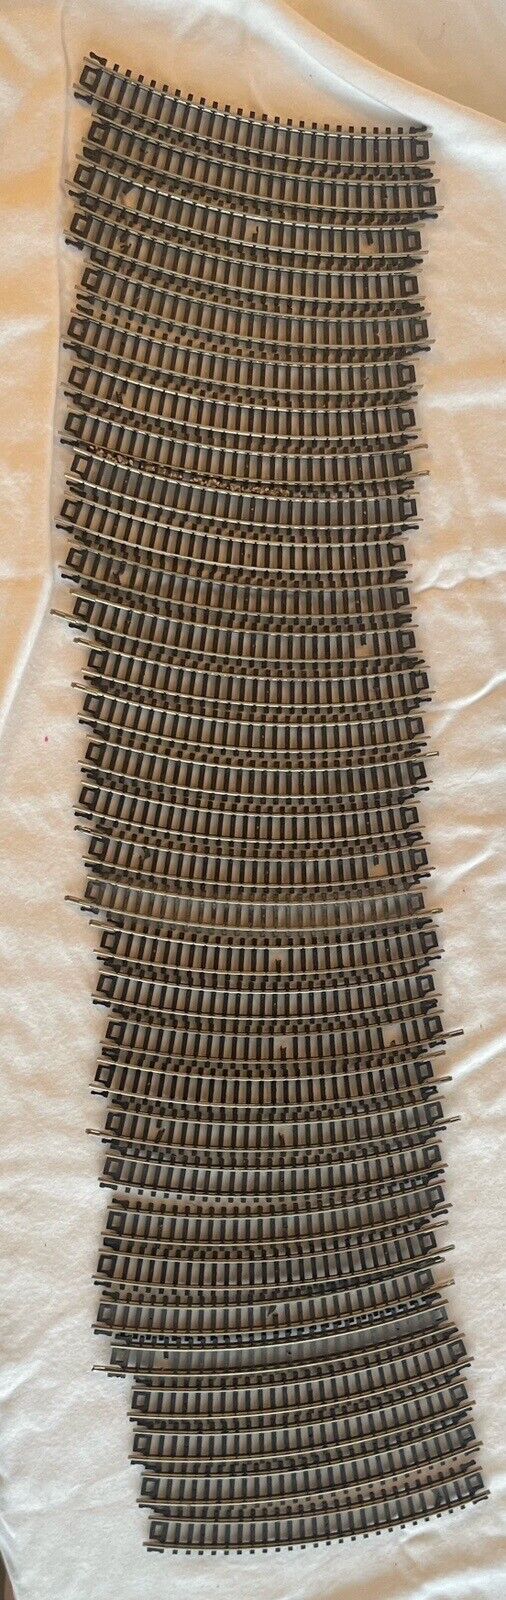 N Scale Atlas 2510 Curved Track 32 Pieces 9.75 in Radius Code 80. C-6 VG